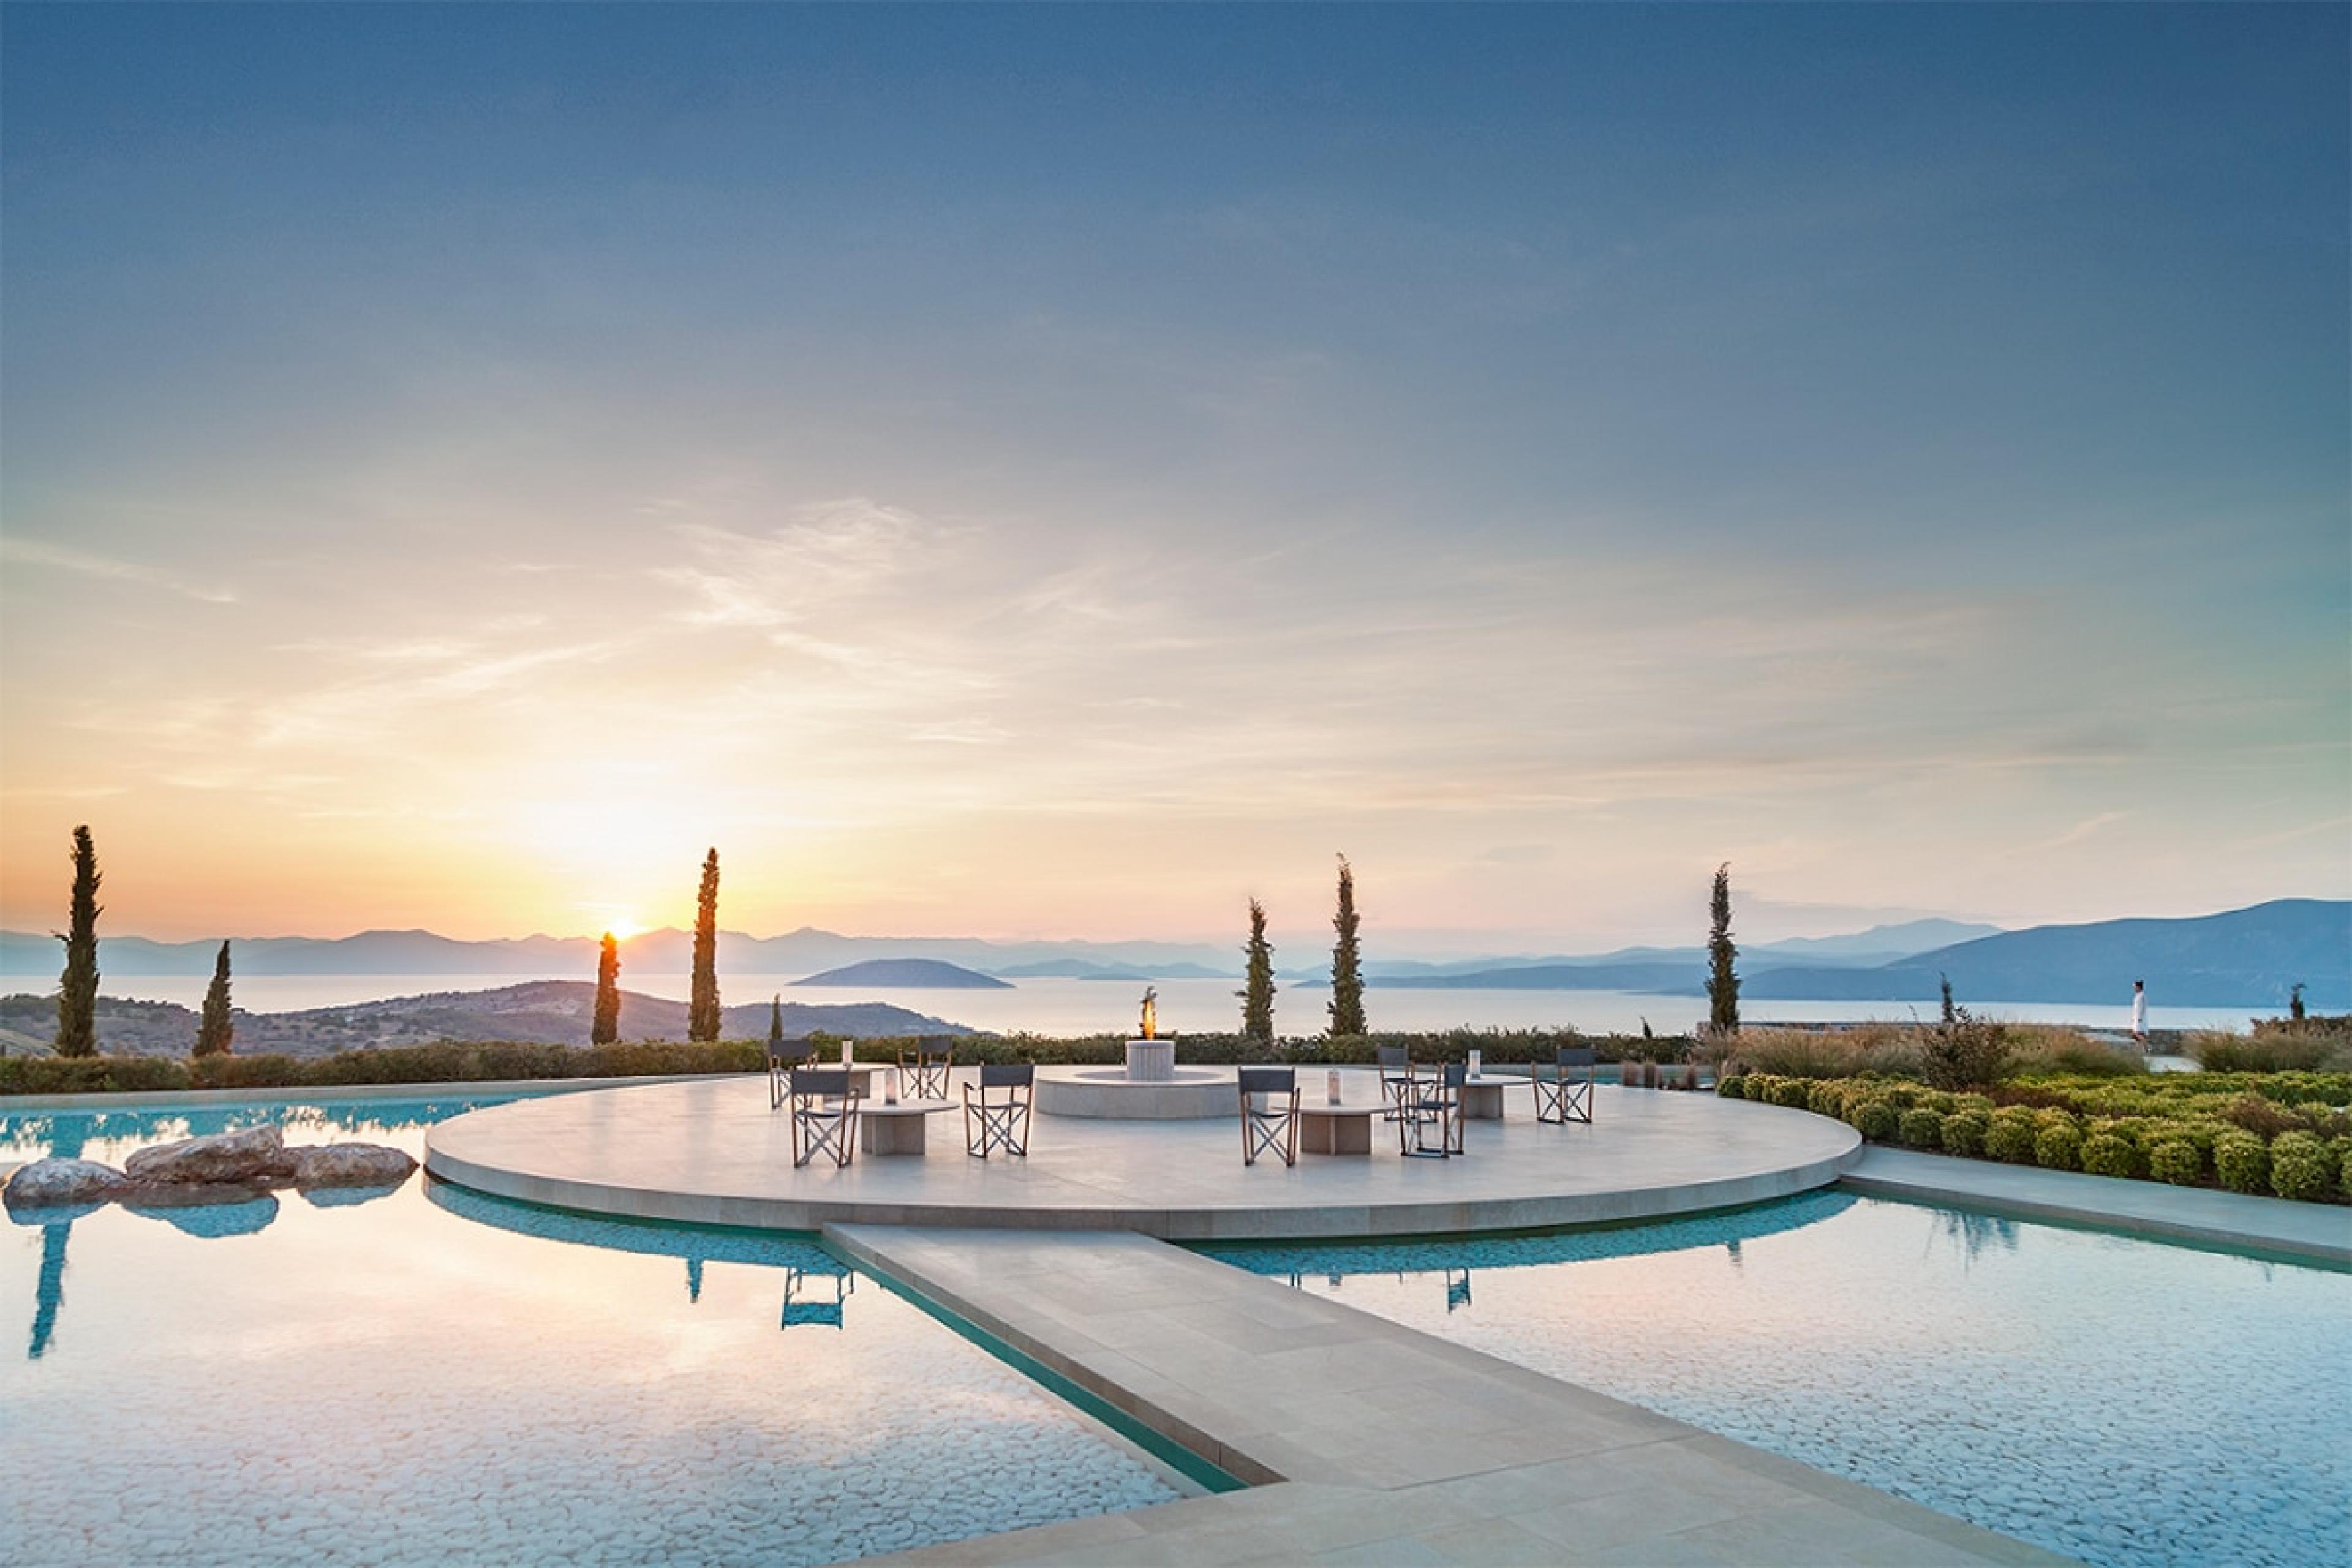 view over terrace bisected by shallow pools on hilltop overlooking greek island view at sunset